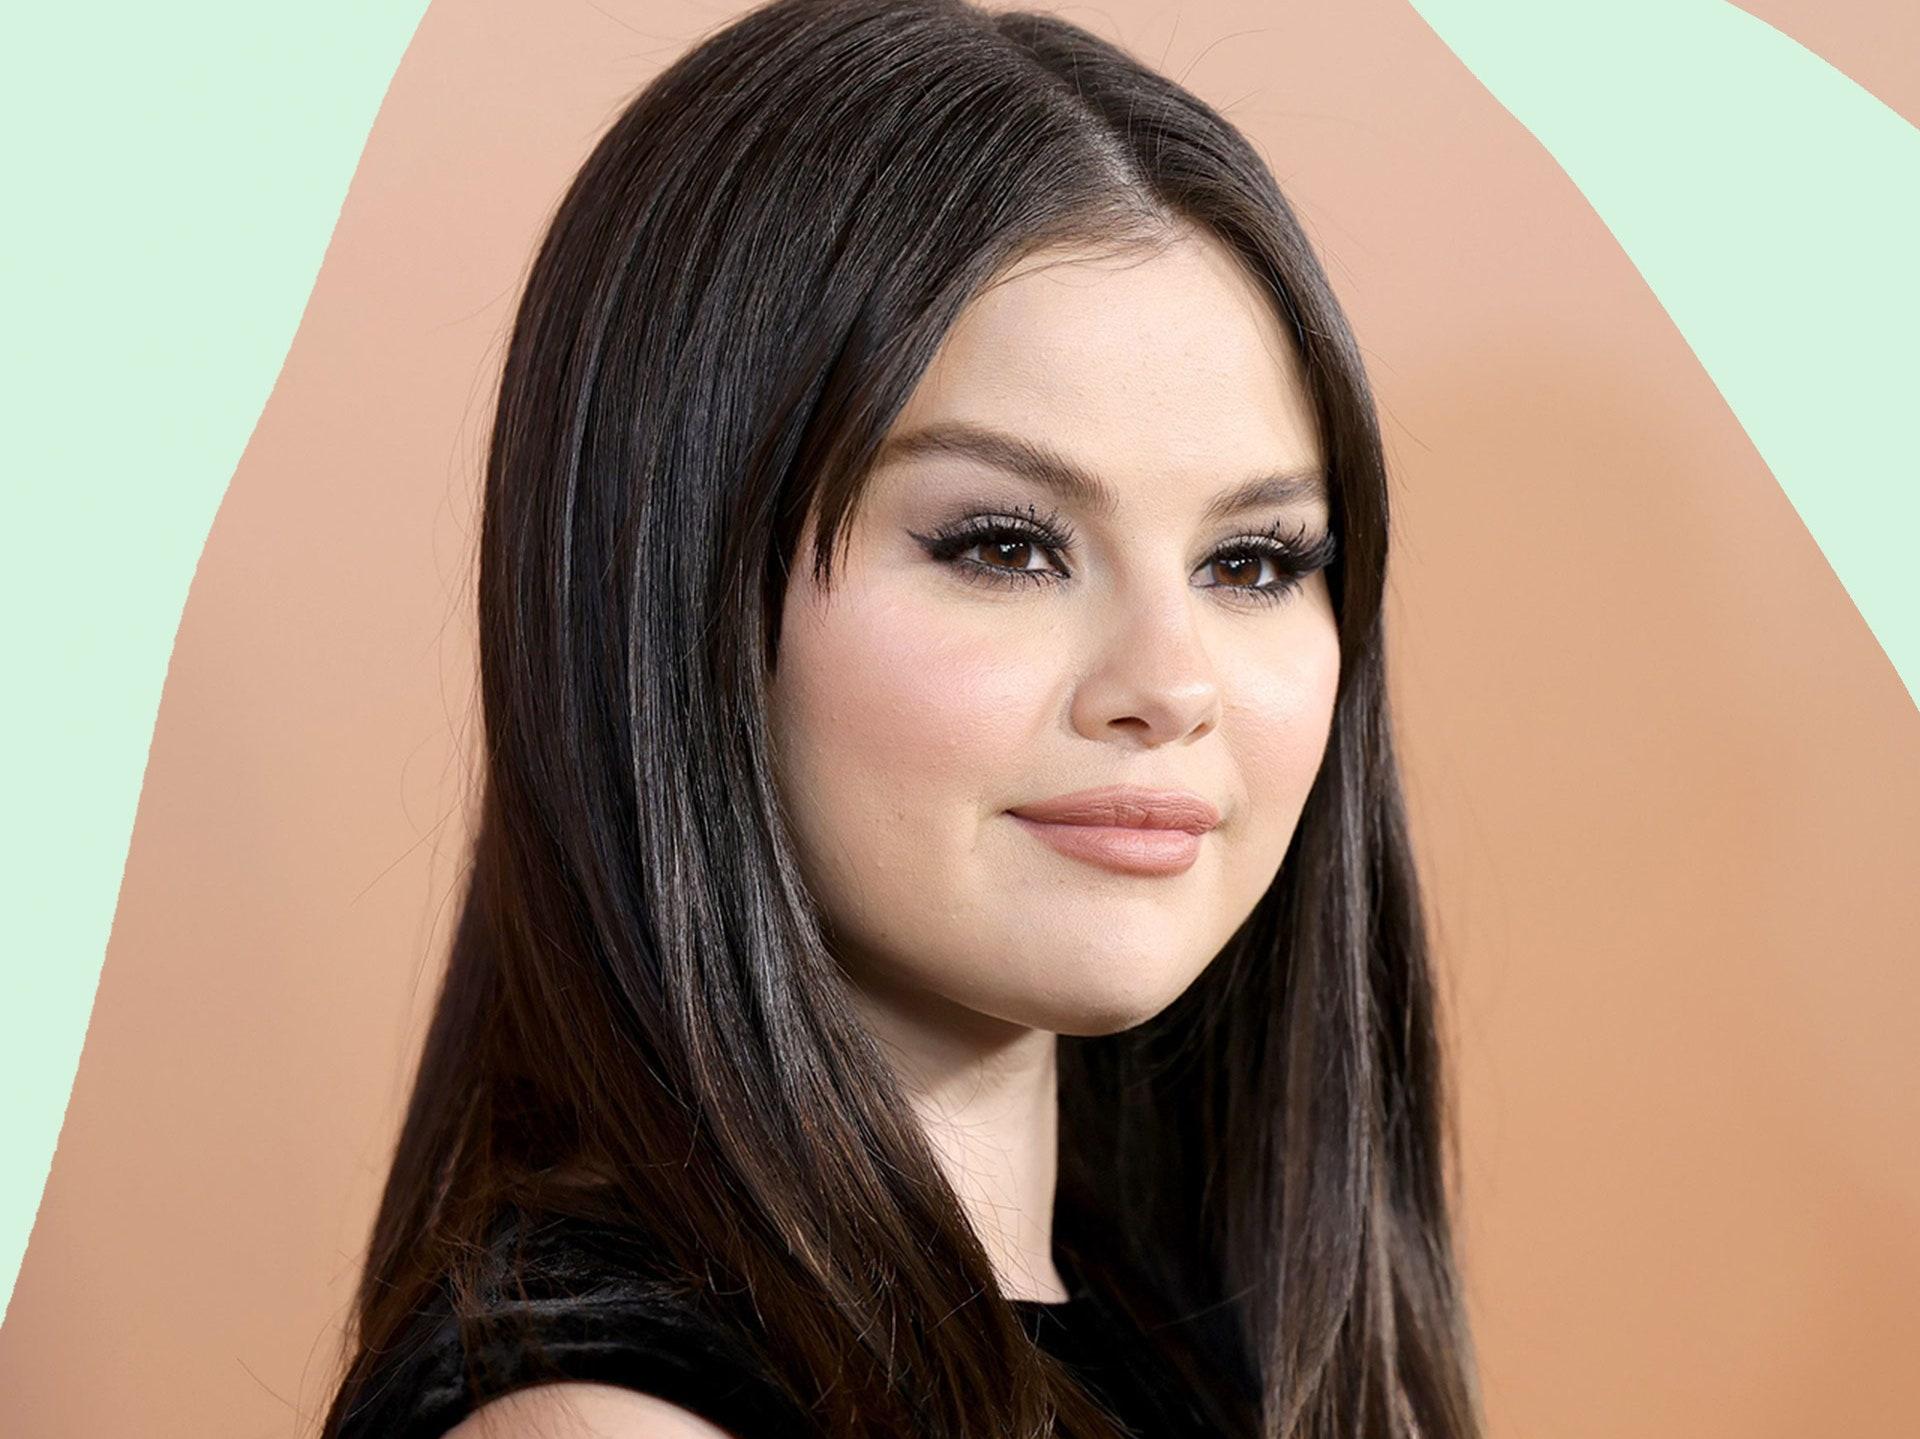 Selena Gomez Being Body Shamed Shows We Still Have A Long Way To